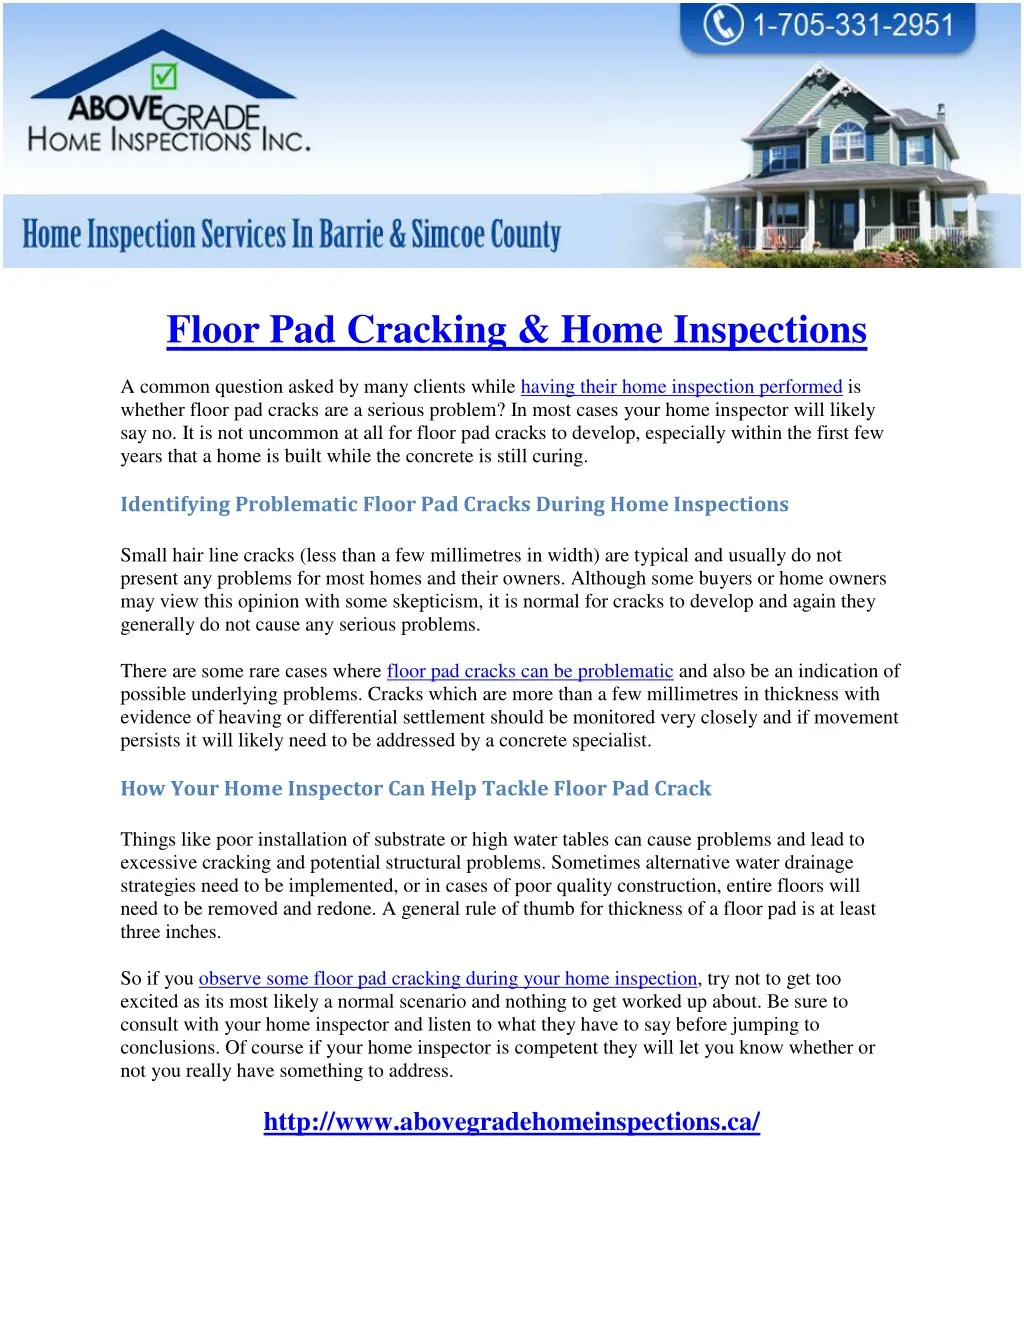 floor pad cracking home inspections